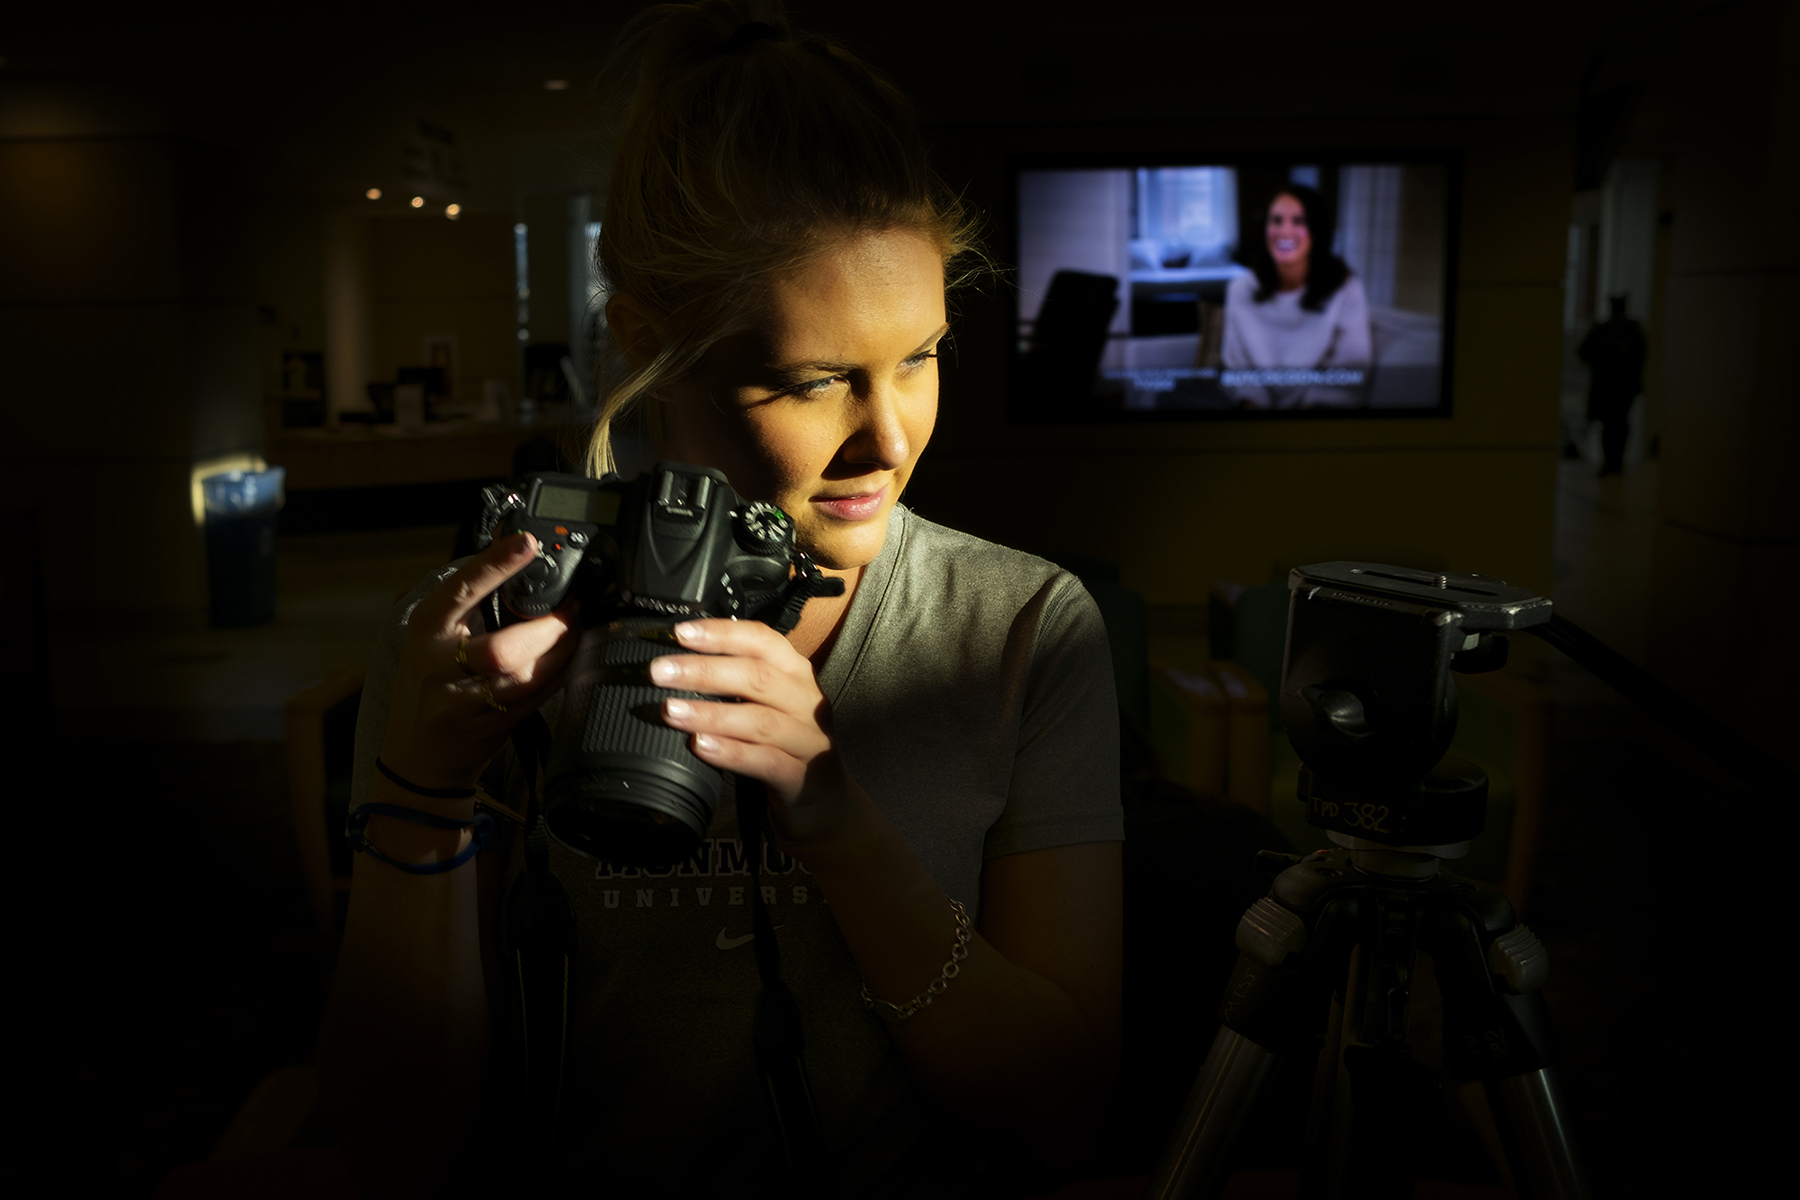 A young woman's face and camera are lit by stylish light with a very dark, moody background